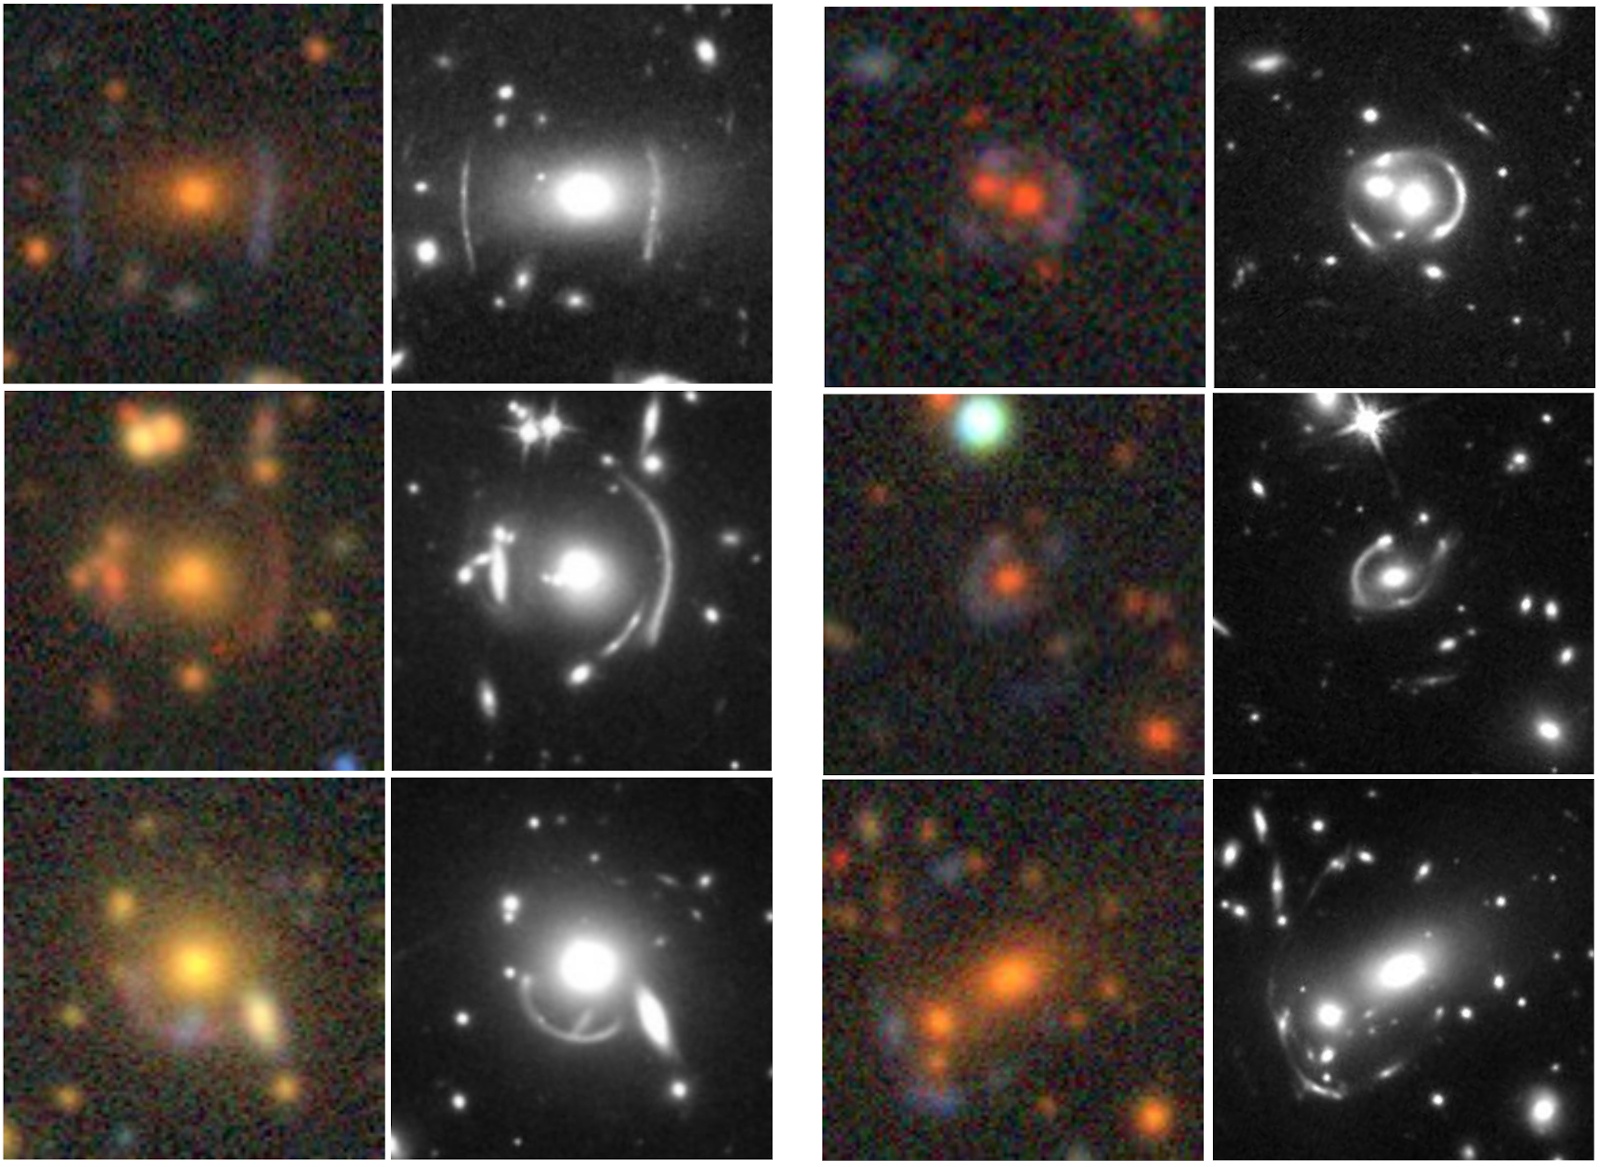 These two columns show side-by-side comparisons of gravitational lens candidates imaged by the ground-based Dark Energy Camera Legacy Survey (color) and the Hubble Space Telescope (black and white). (Credit: Dark Energy Camera Legacy Survey, Hubble Space Telescope)